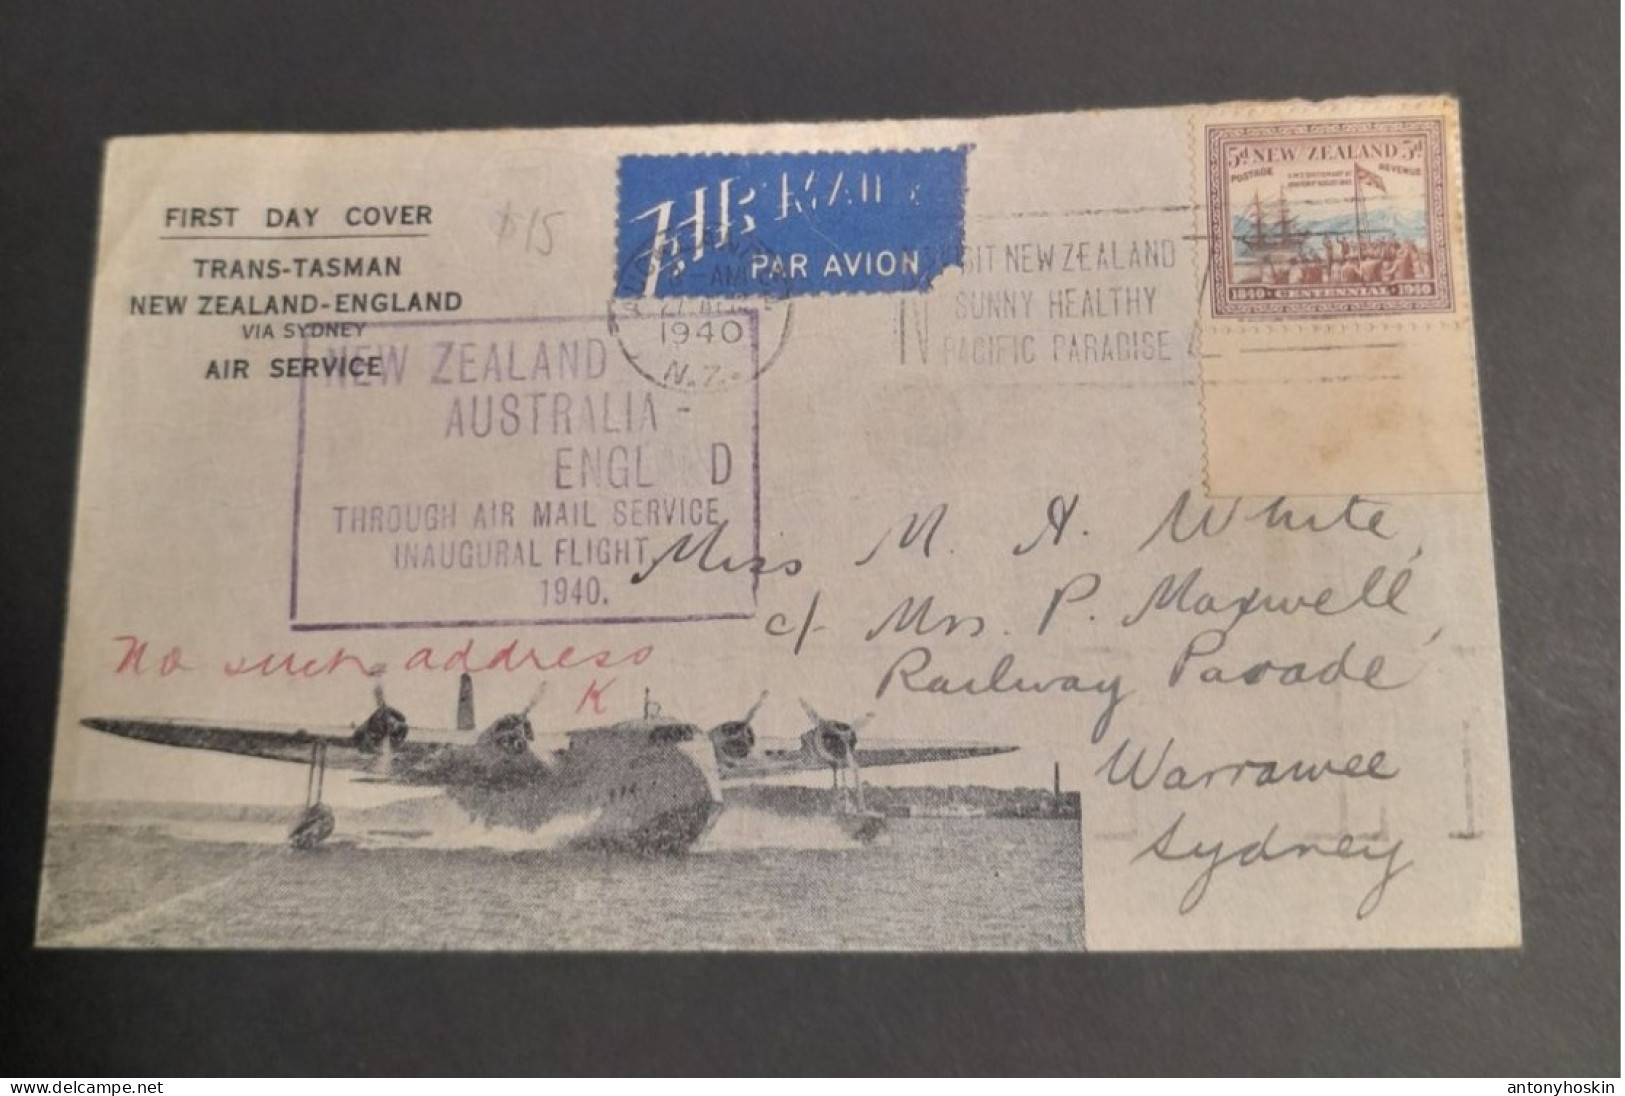 27 April 1940 New Zealand - Australia -England First Day Cover - Luftpost